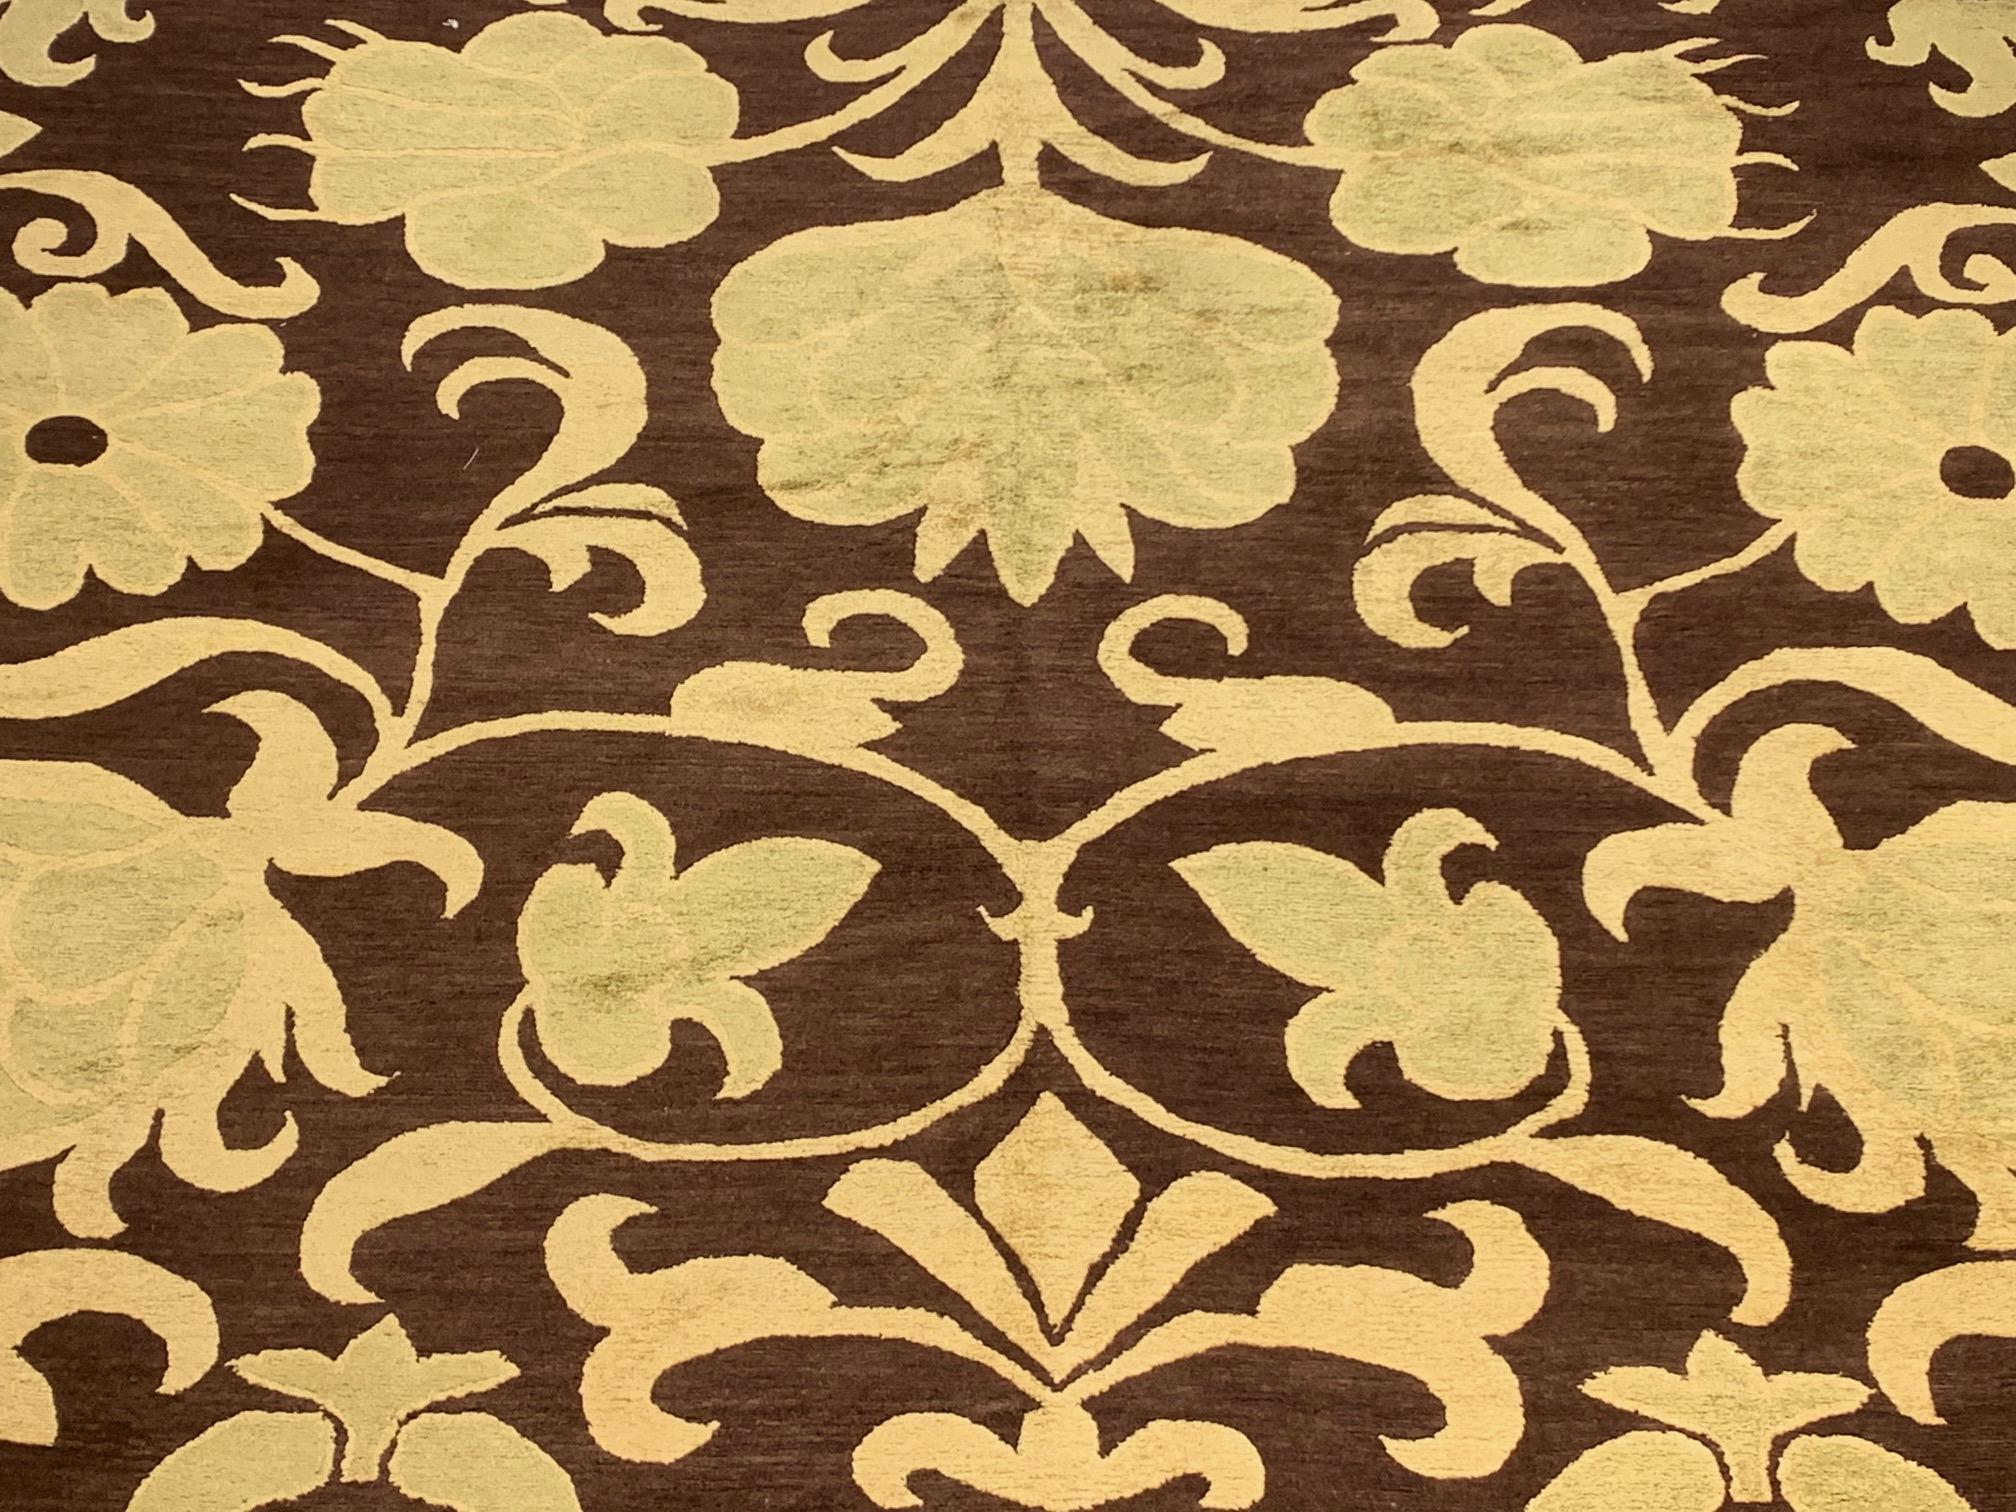 European Inspired Gold and Brown Handmade Wool Rug by Doris Leslie Blau In New Condition For Sale In New York, NY